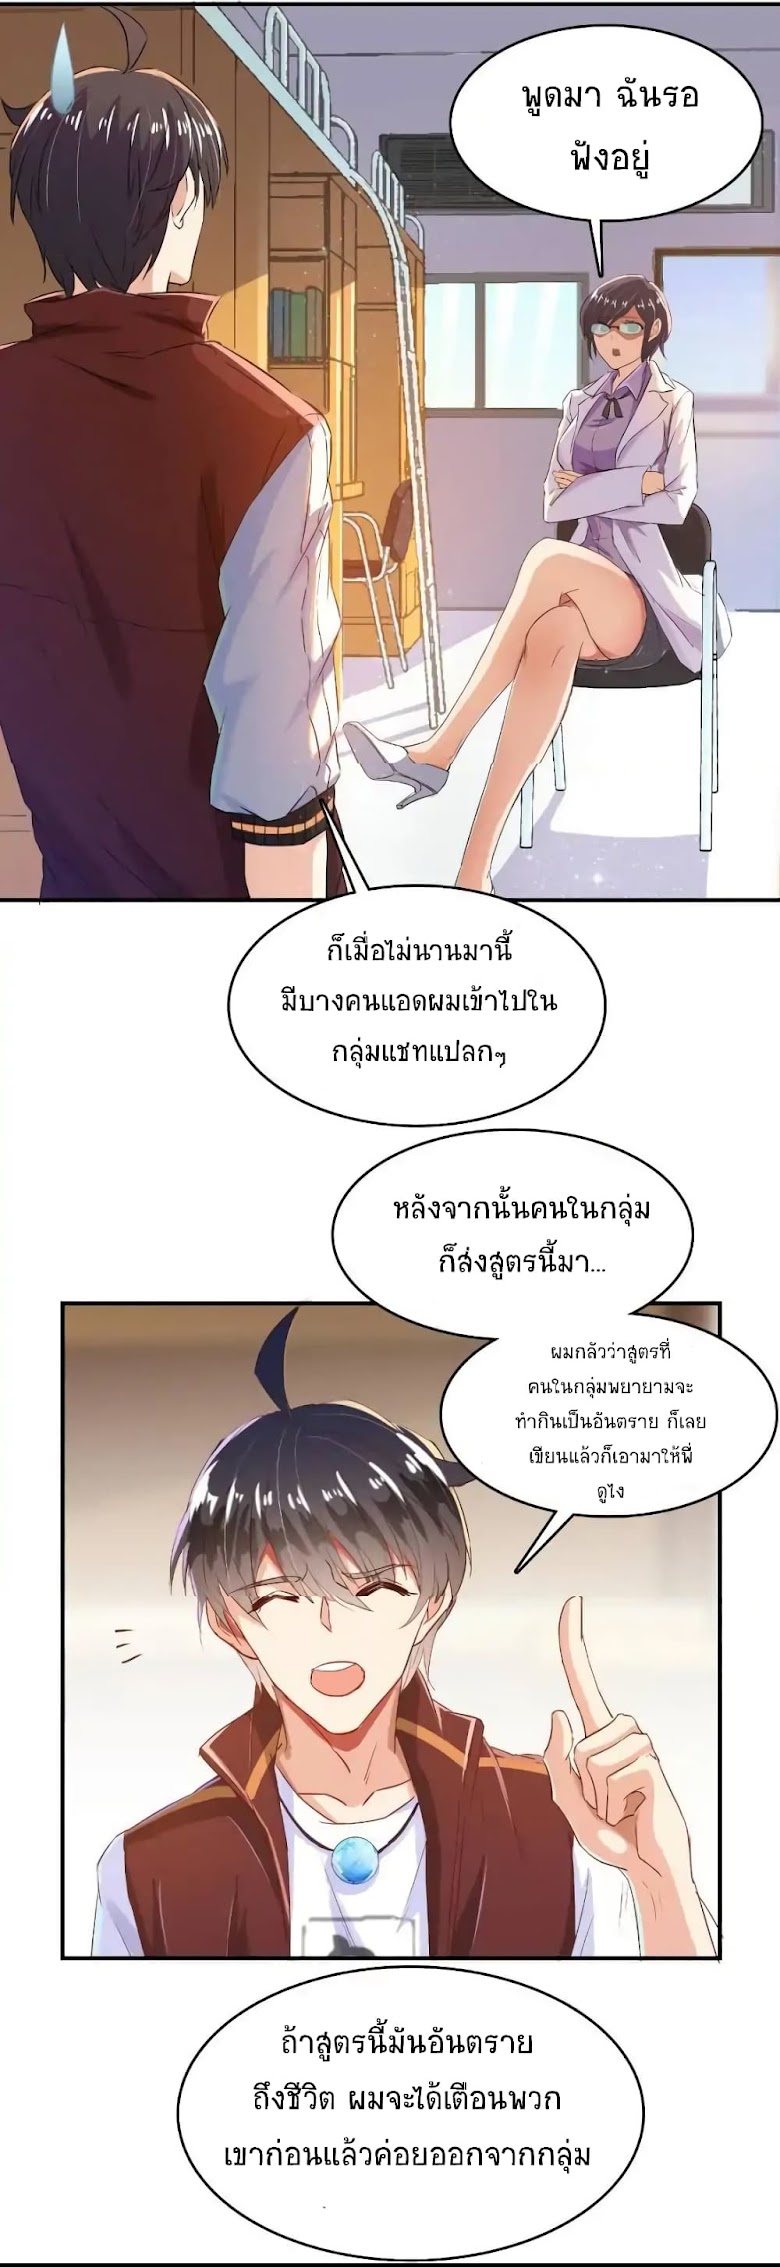 Cultivation Chat Group - หน้า 9